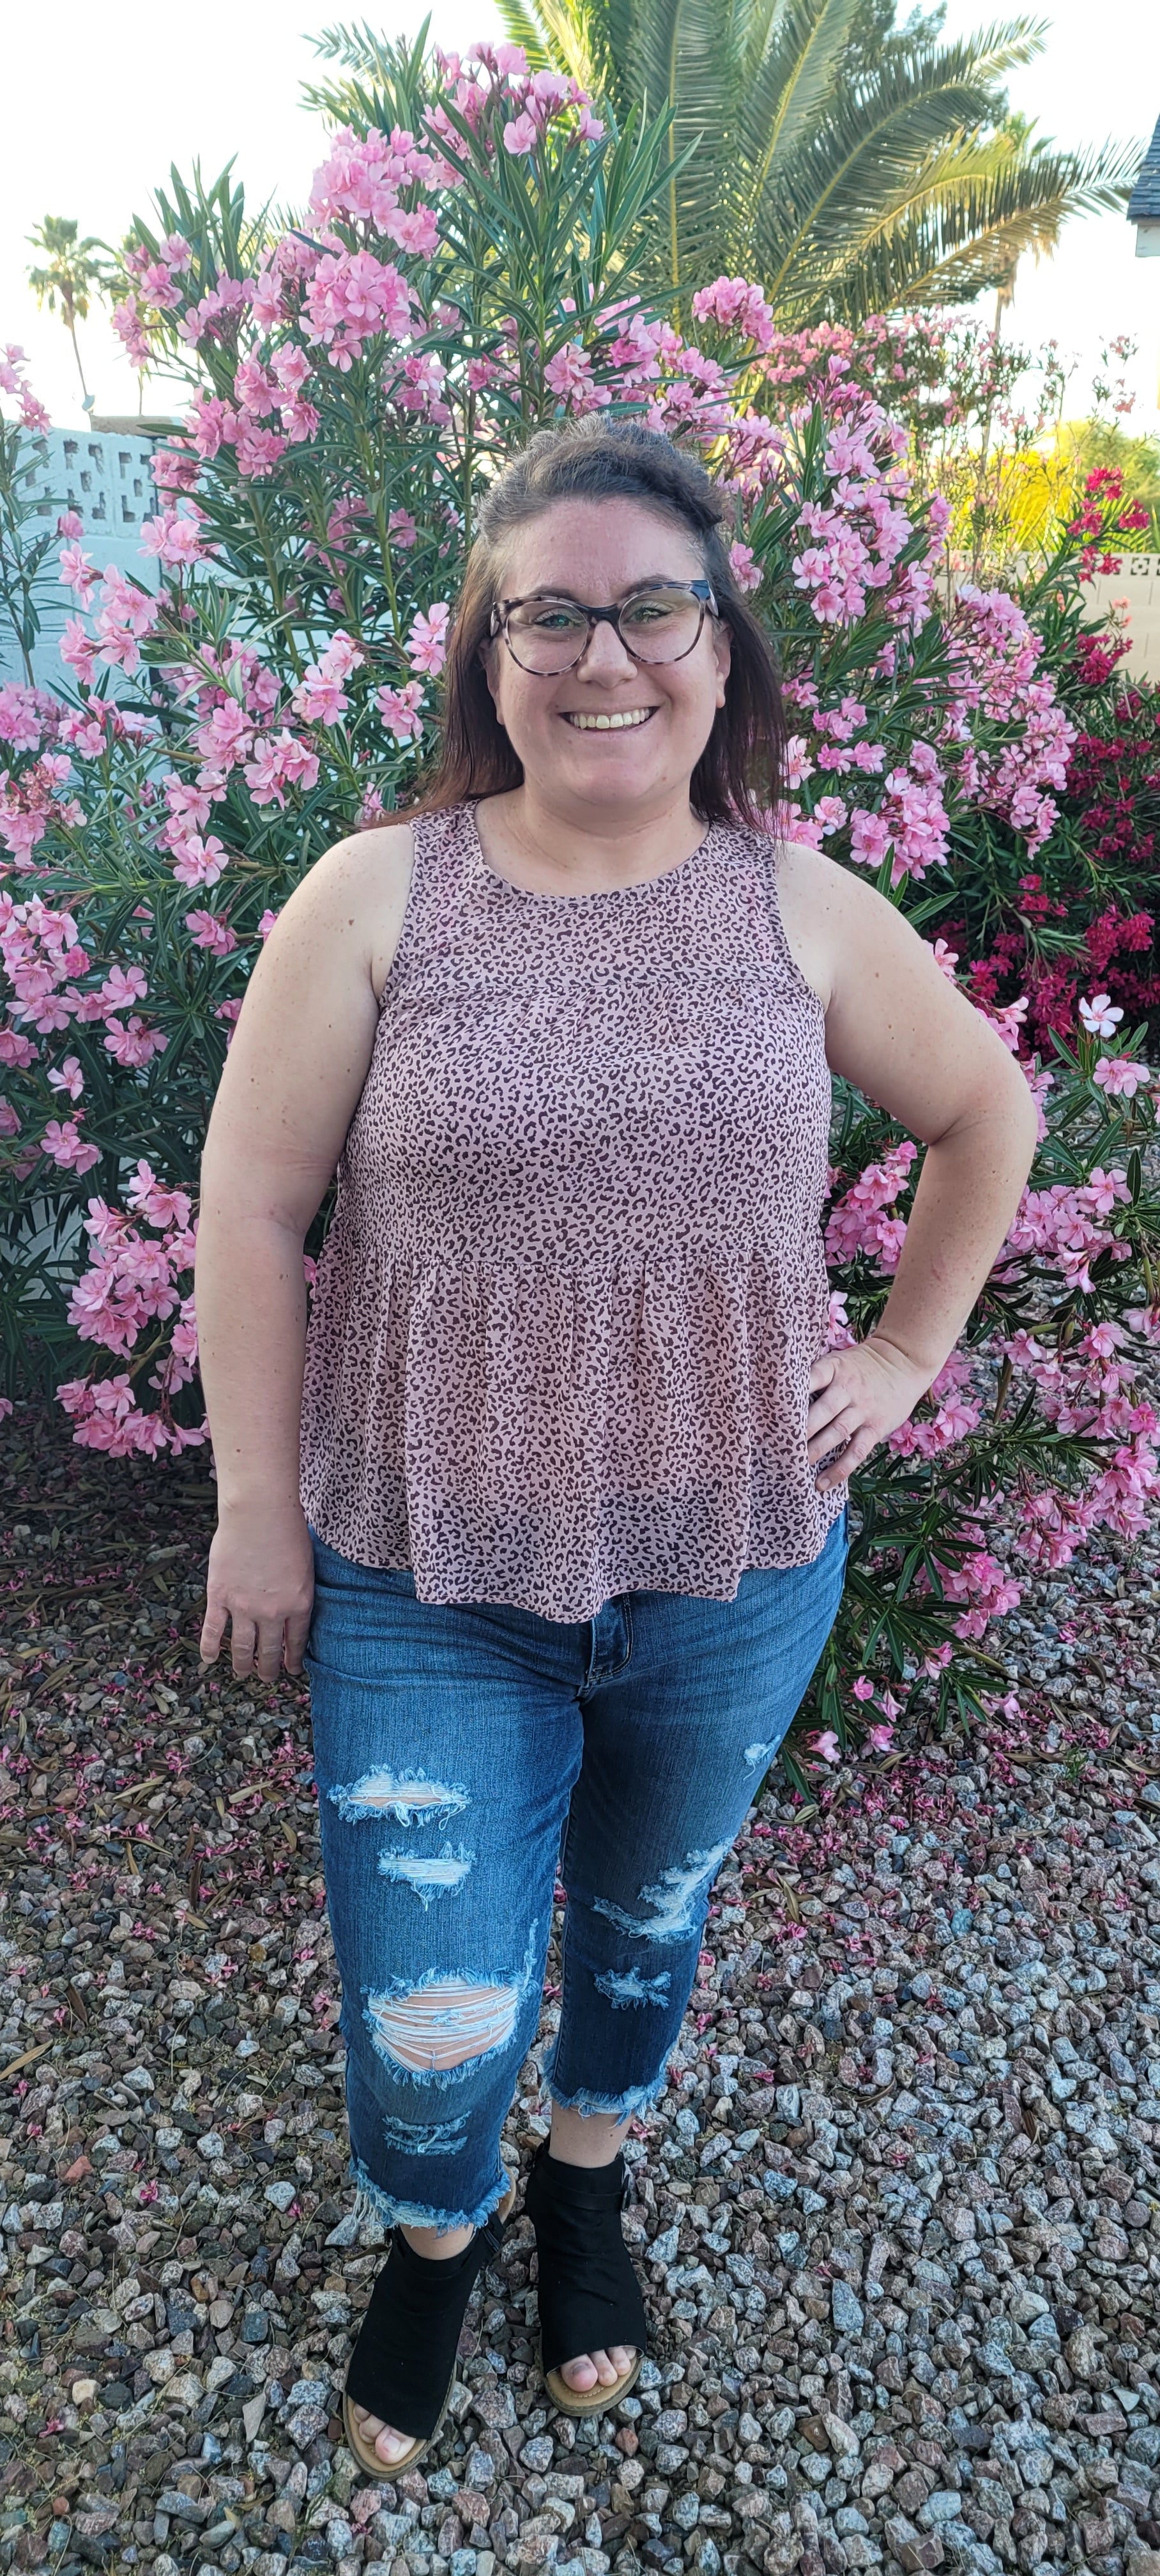 Fancy & Free is a A-line, leopard print, tiered top is sleeveless, flowy and sheer. It features a key hole back with button closure, and has a rounded neckline.  This top is light pink with brown leopard print. It is great for vacation, an evening out, casual event, a day out on the town with your friends, or just because. Sizes small through large.